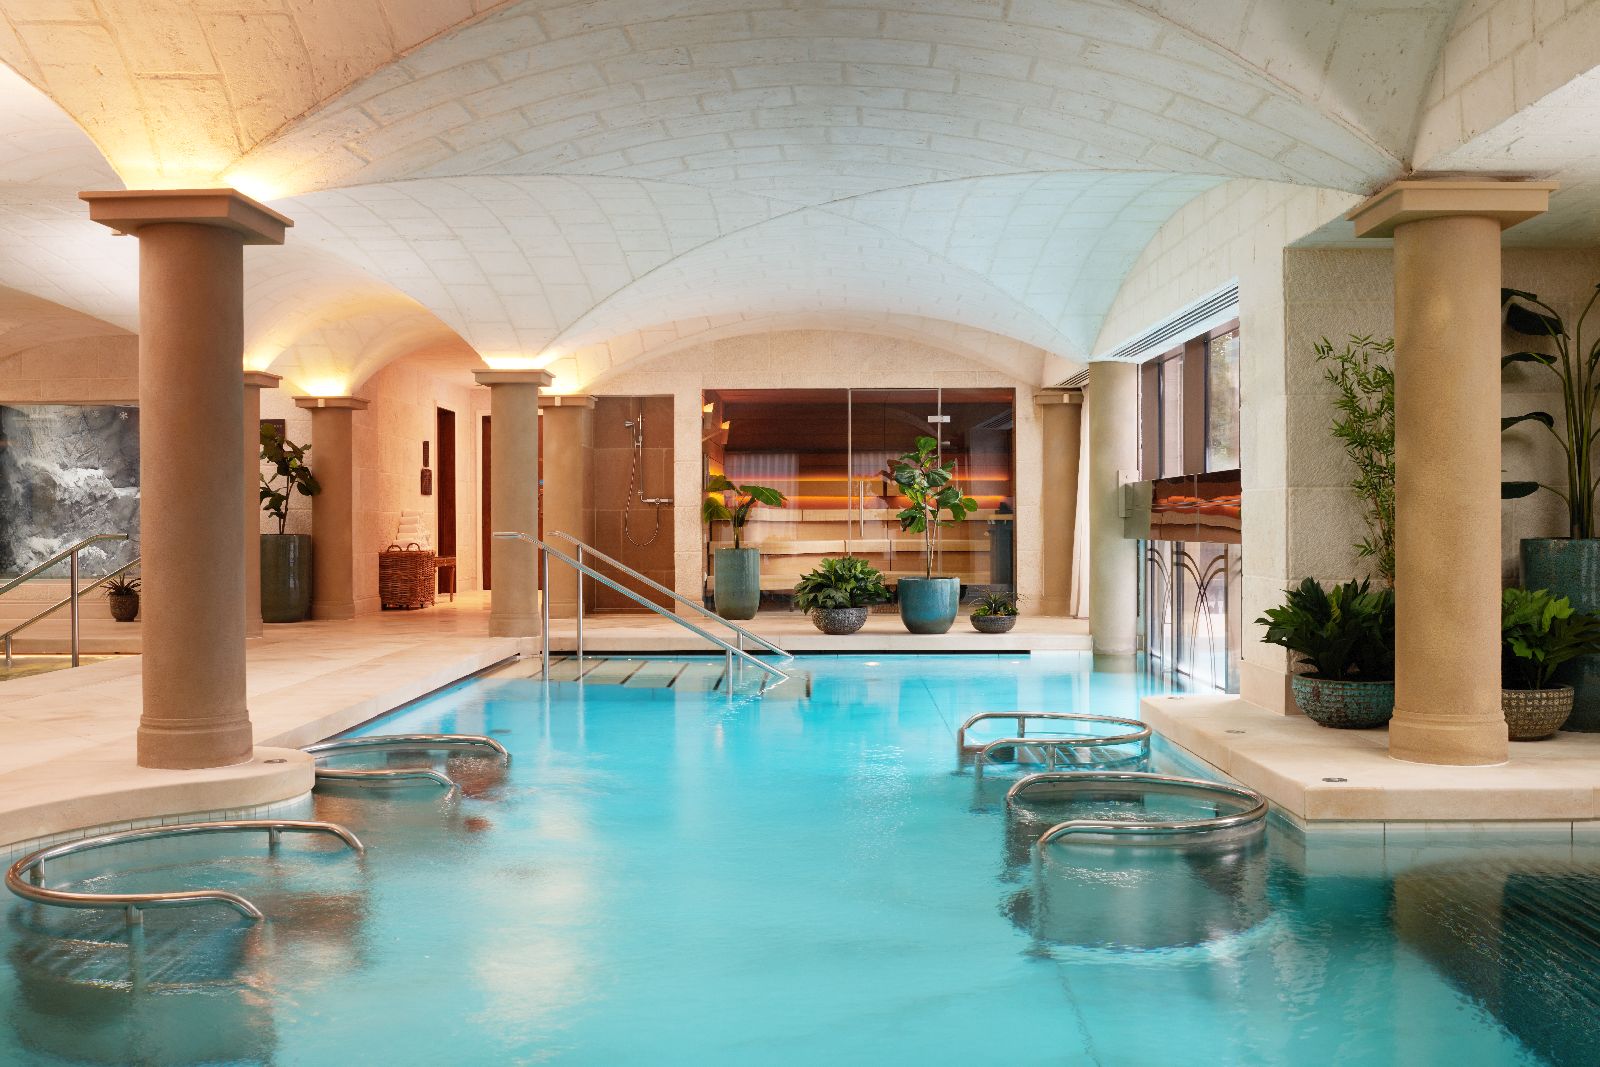 Hydrotherapy pool in the spa at Grantley Hall hotel in Yorkshire England